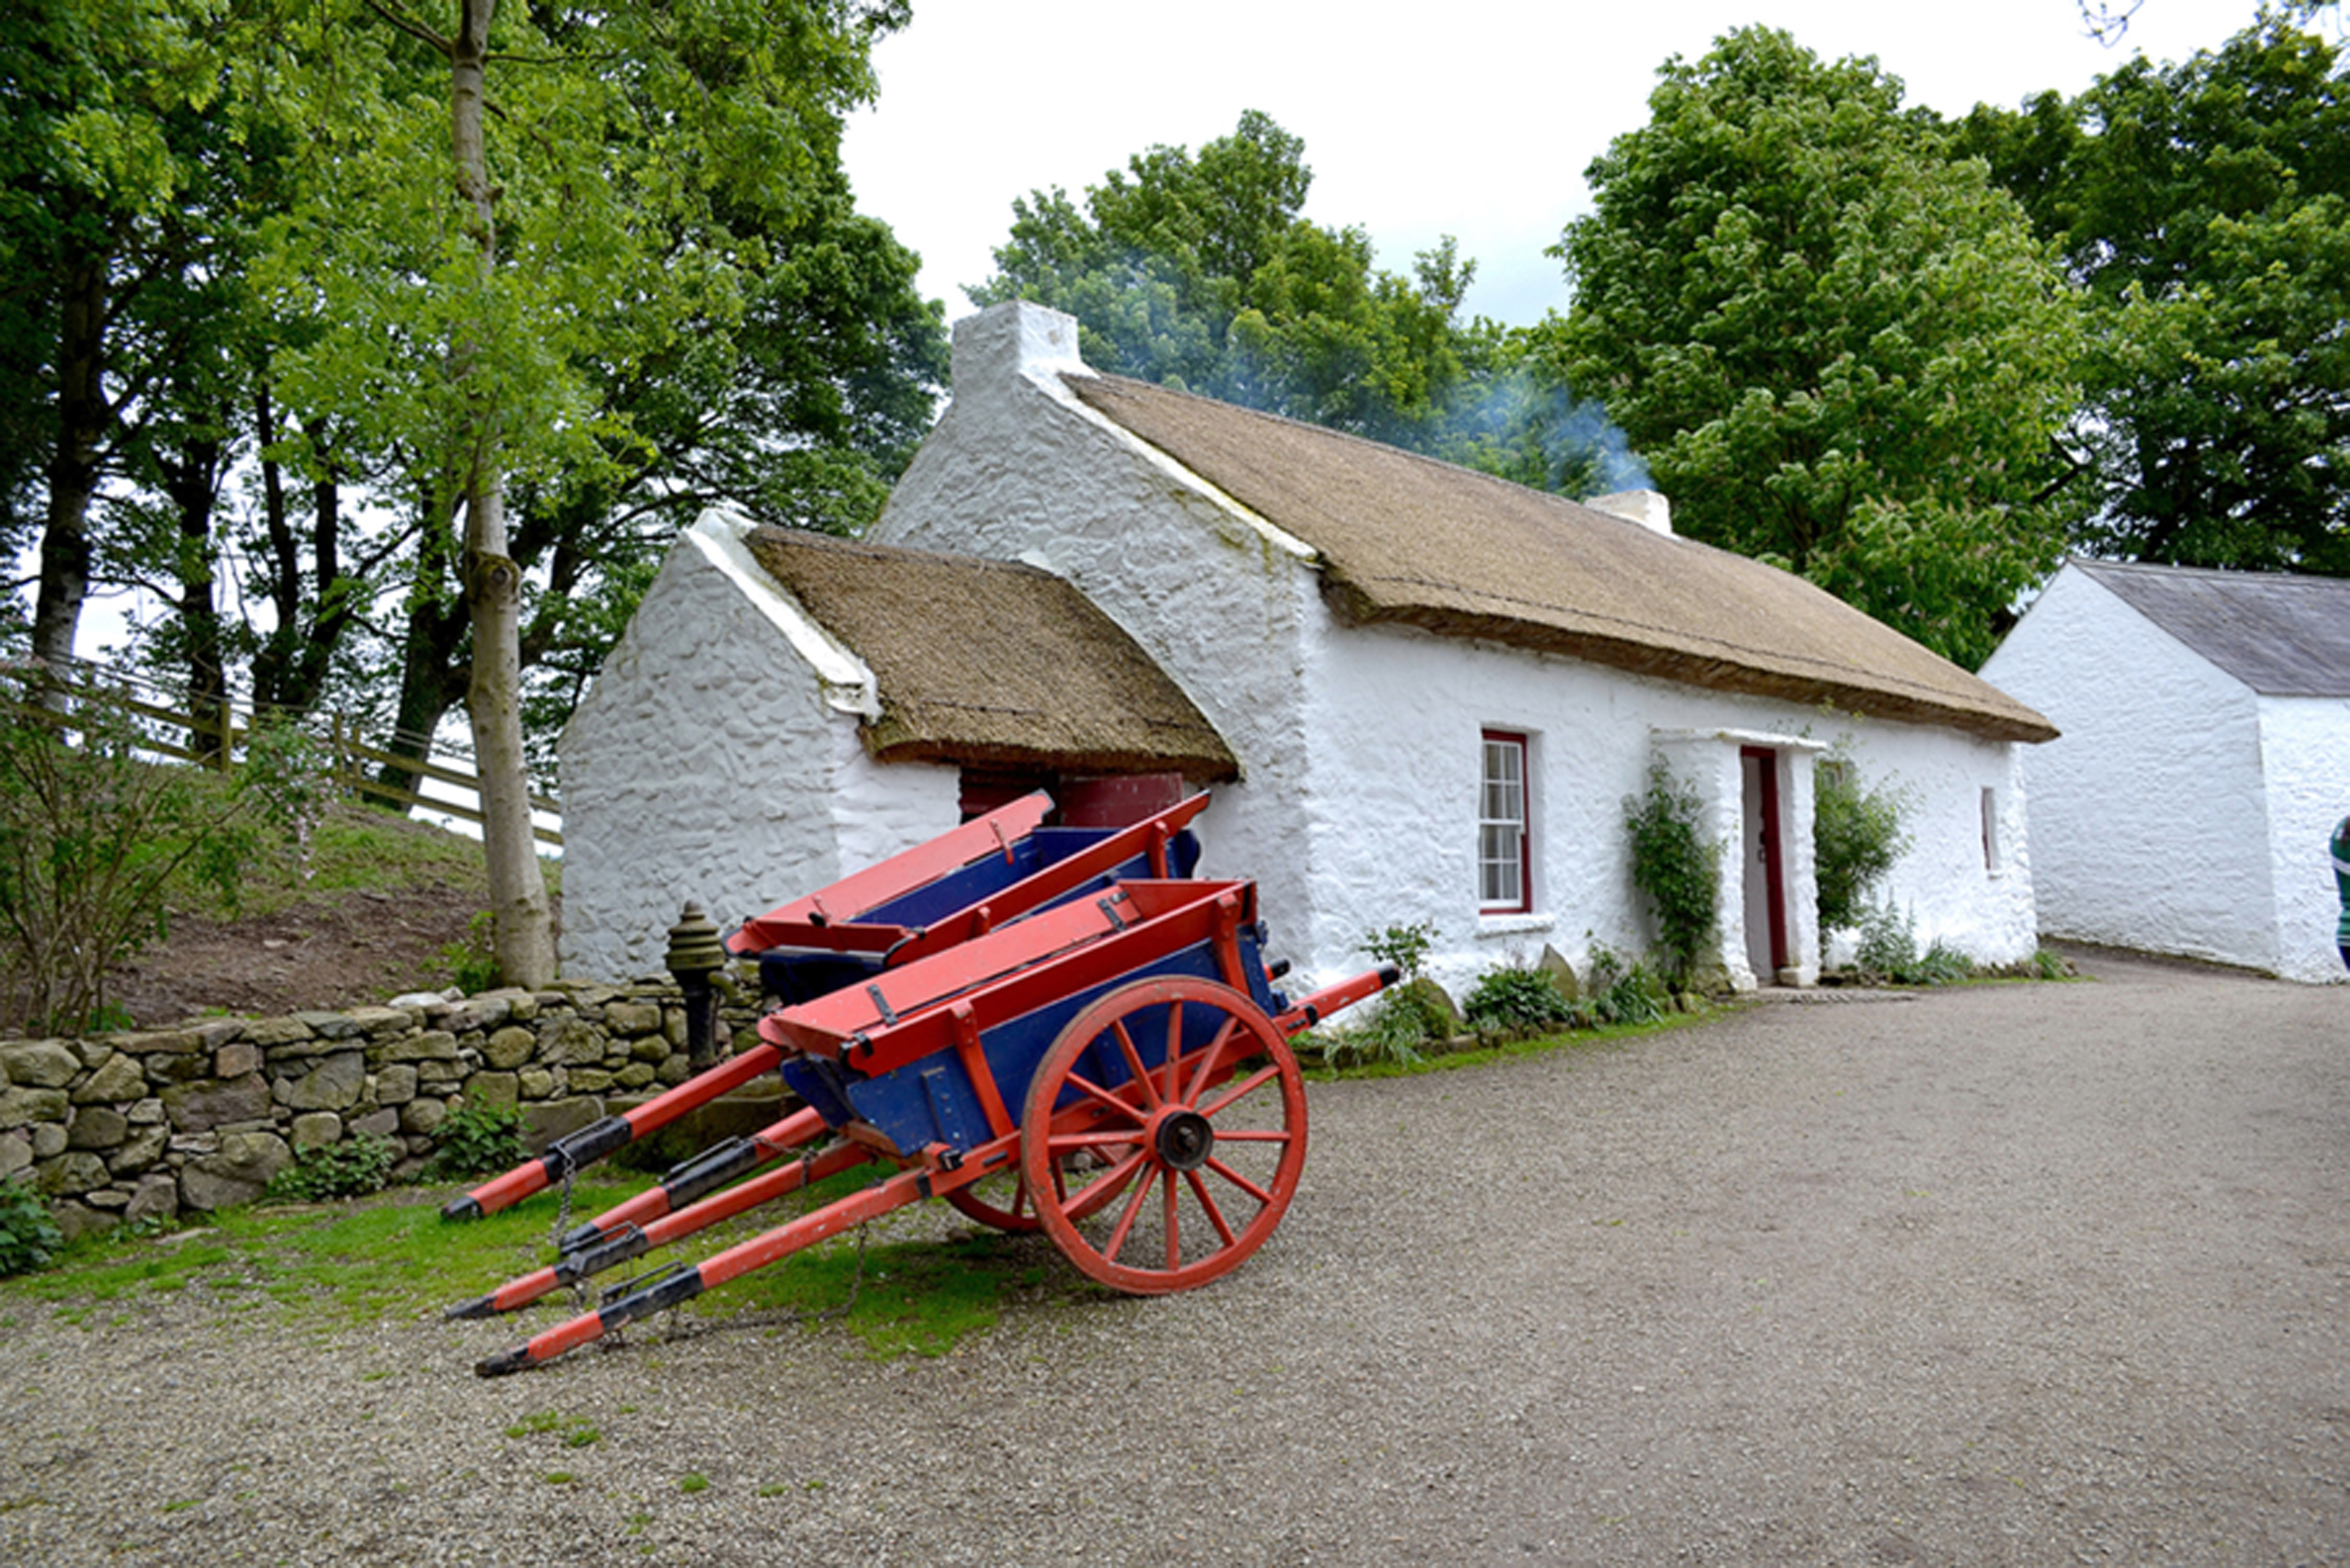 Folk Park named among top outdoor visitor attractions